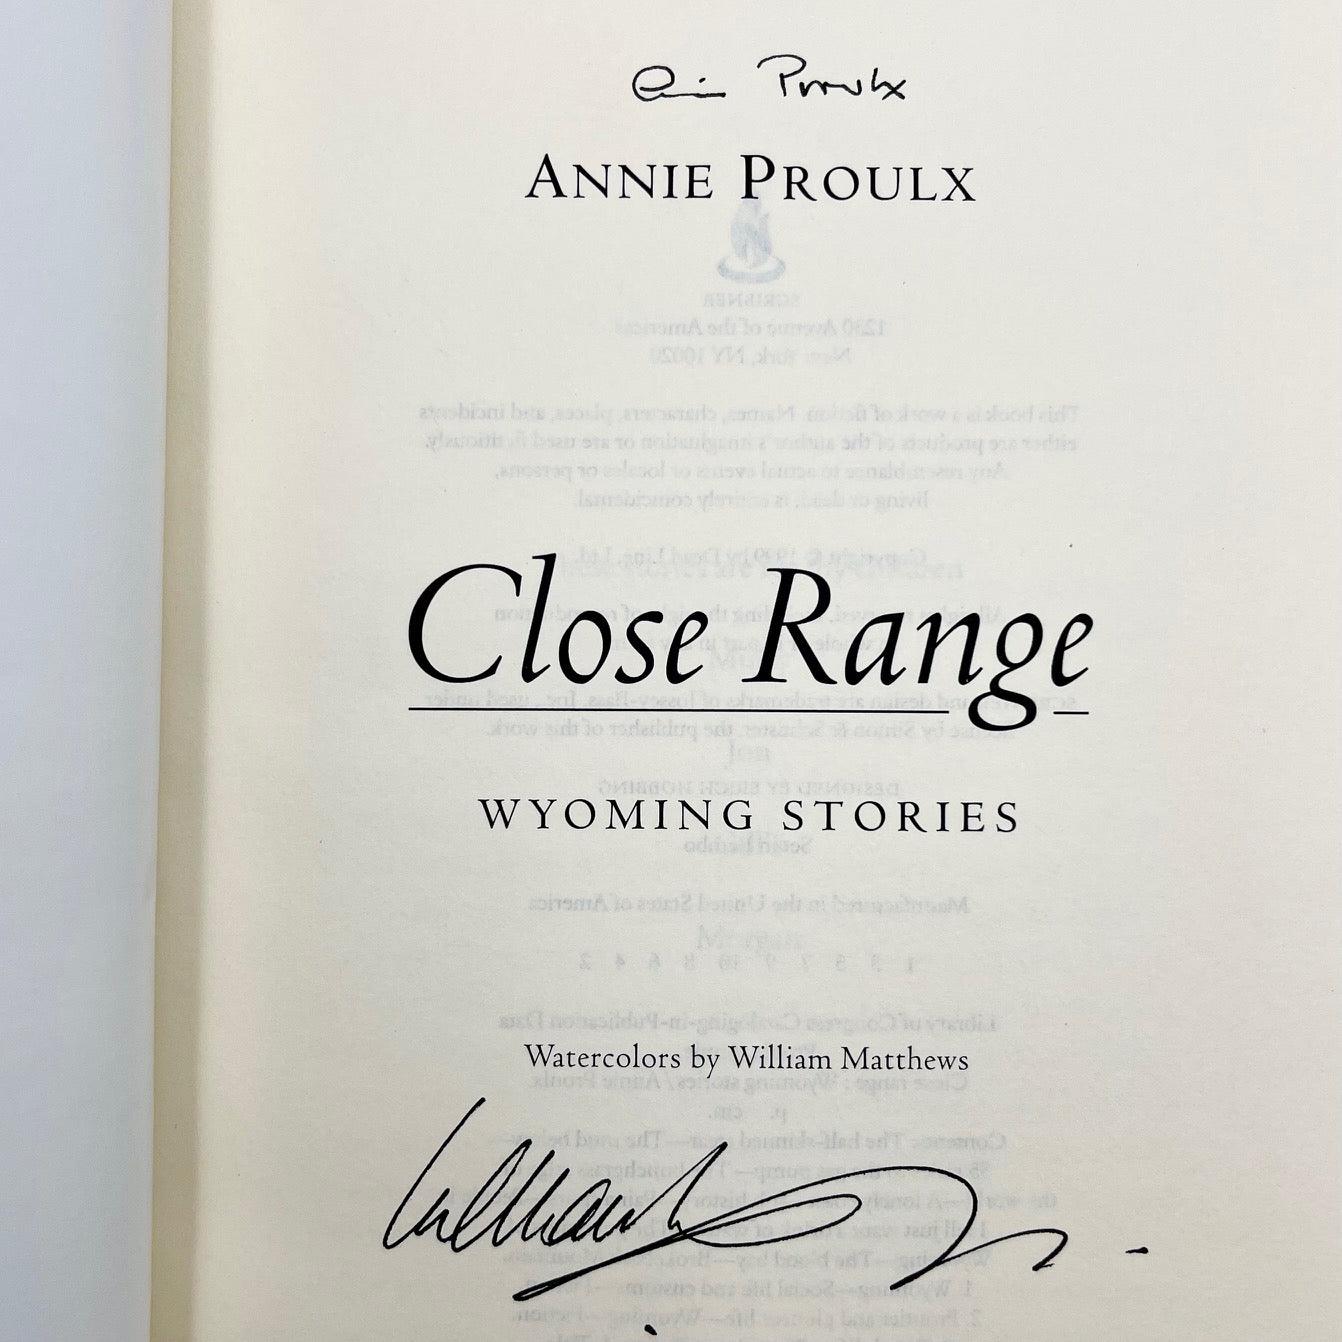 Close Range: Wyoming Stories (signed by both Annie Proulx and the artist, William Matthews) - Grinning Cat Books - books - AMERICAN WEST, SIGNED